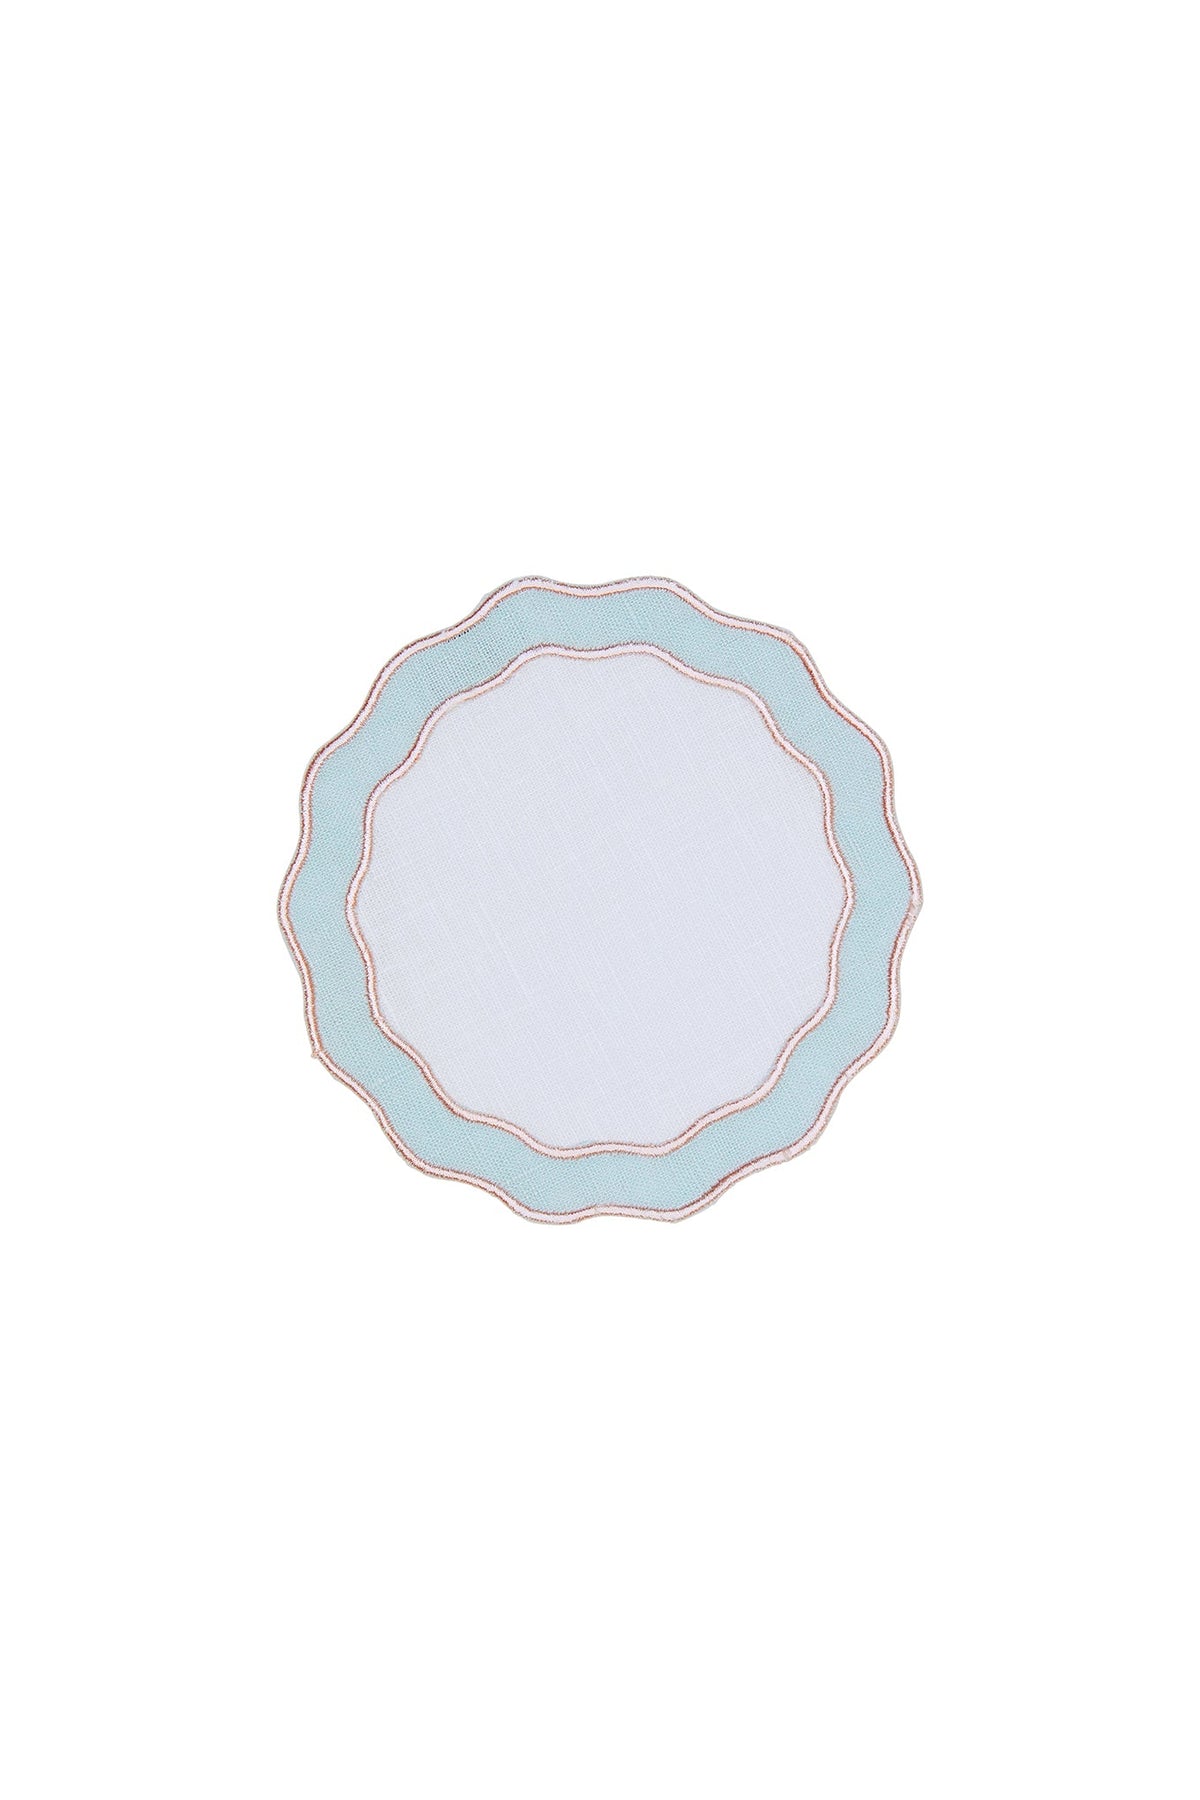 Set of Four Pink and Light Blue Round Appliqué